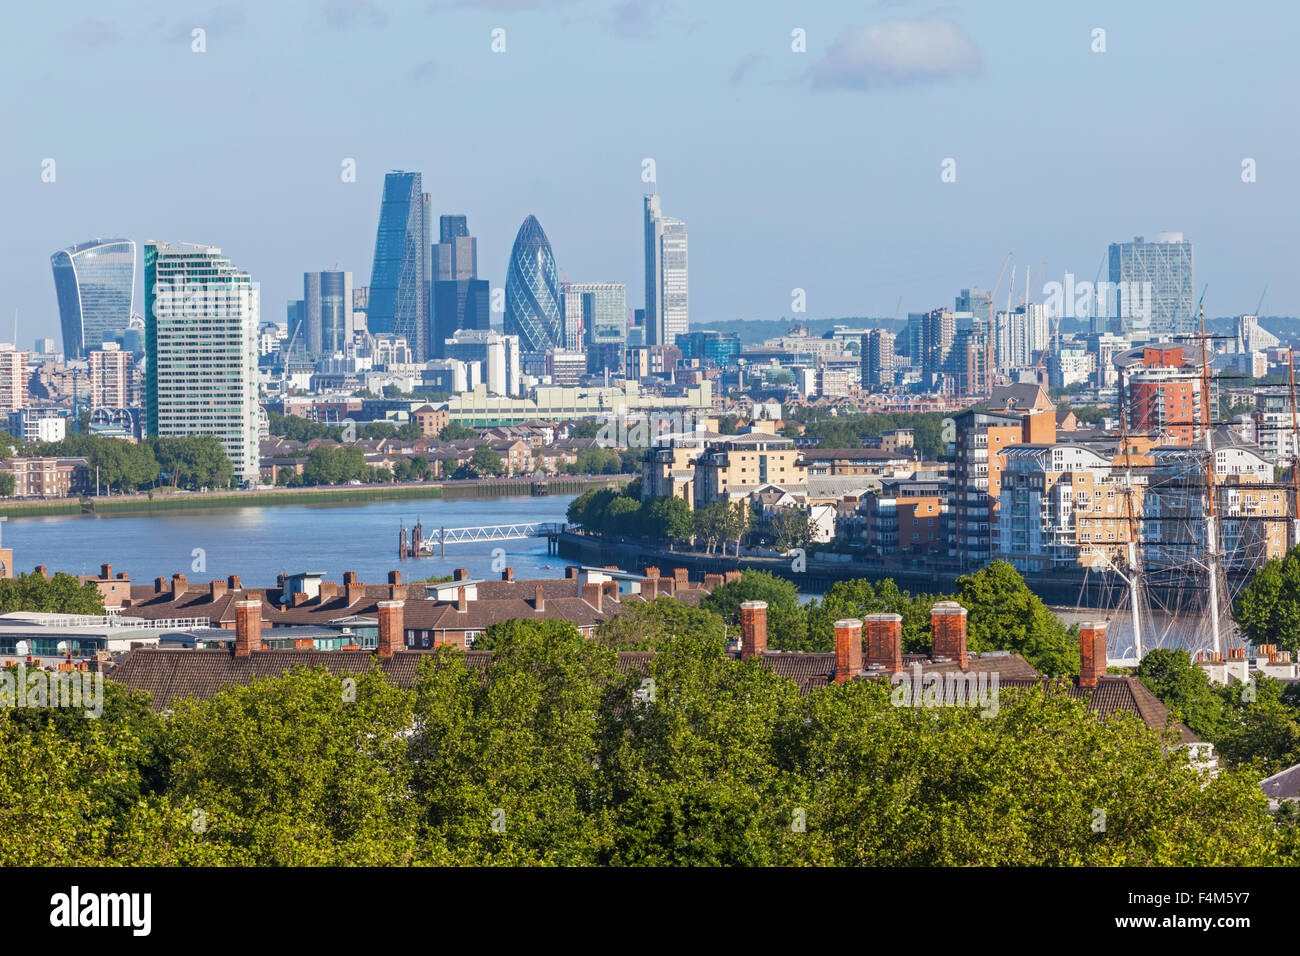 England, London, Greenwich, View of River Thames and London Skyline ...